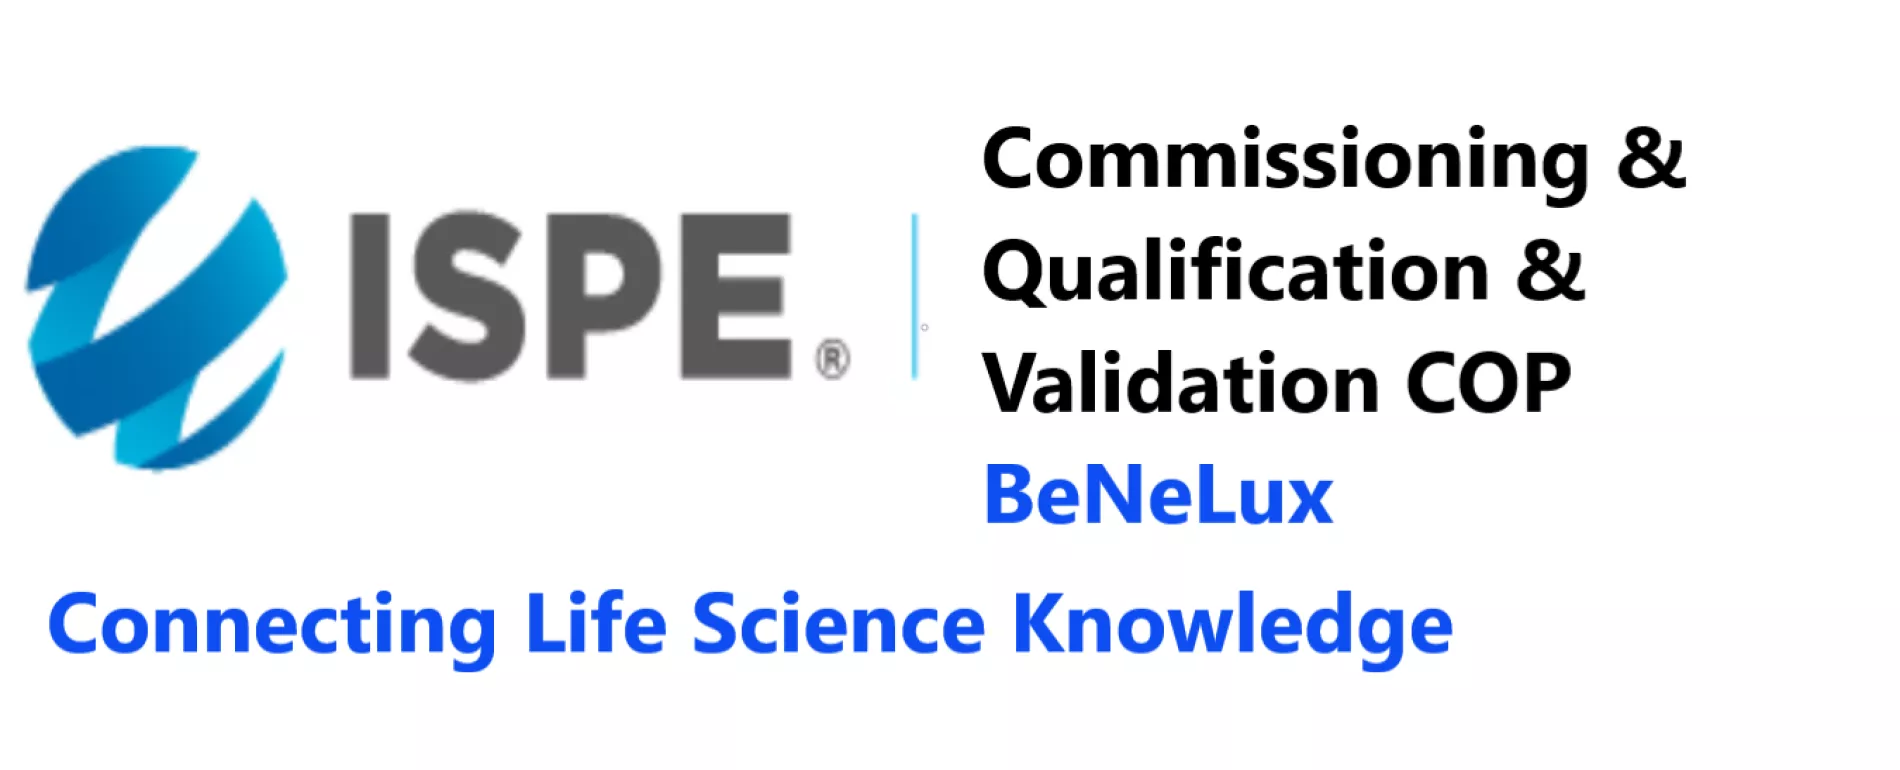 Life Sciences Commissioning, Qualification and Validation